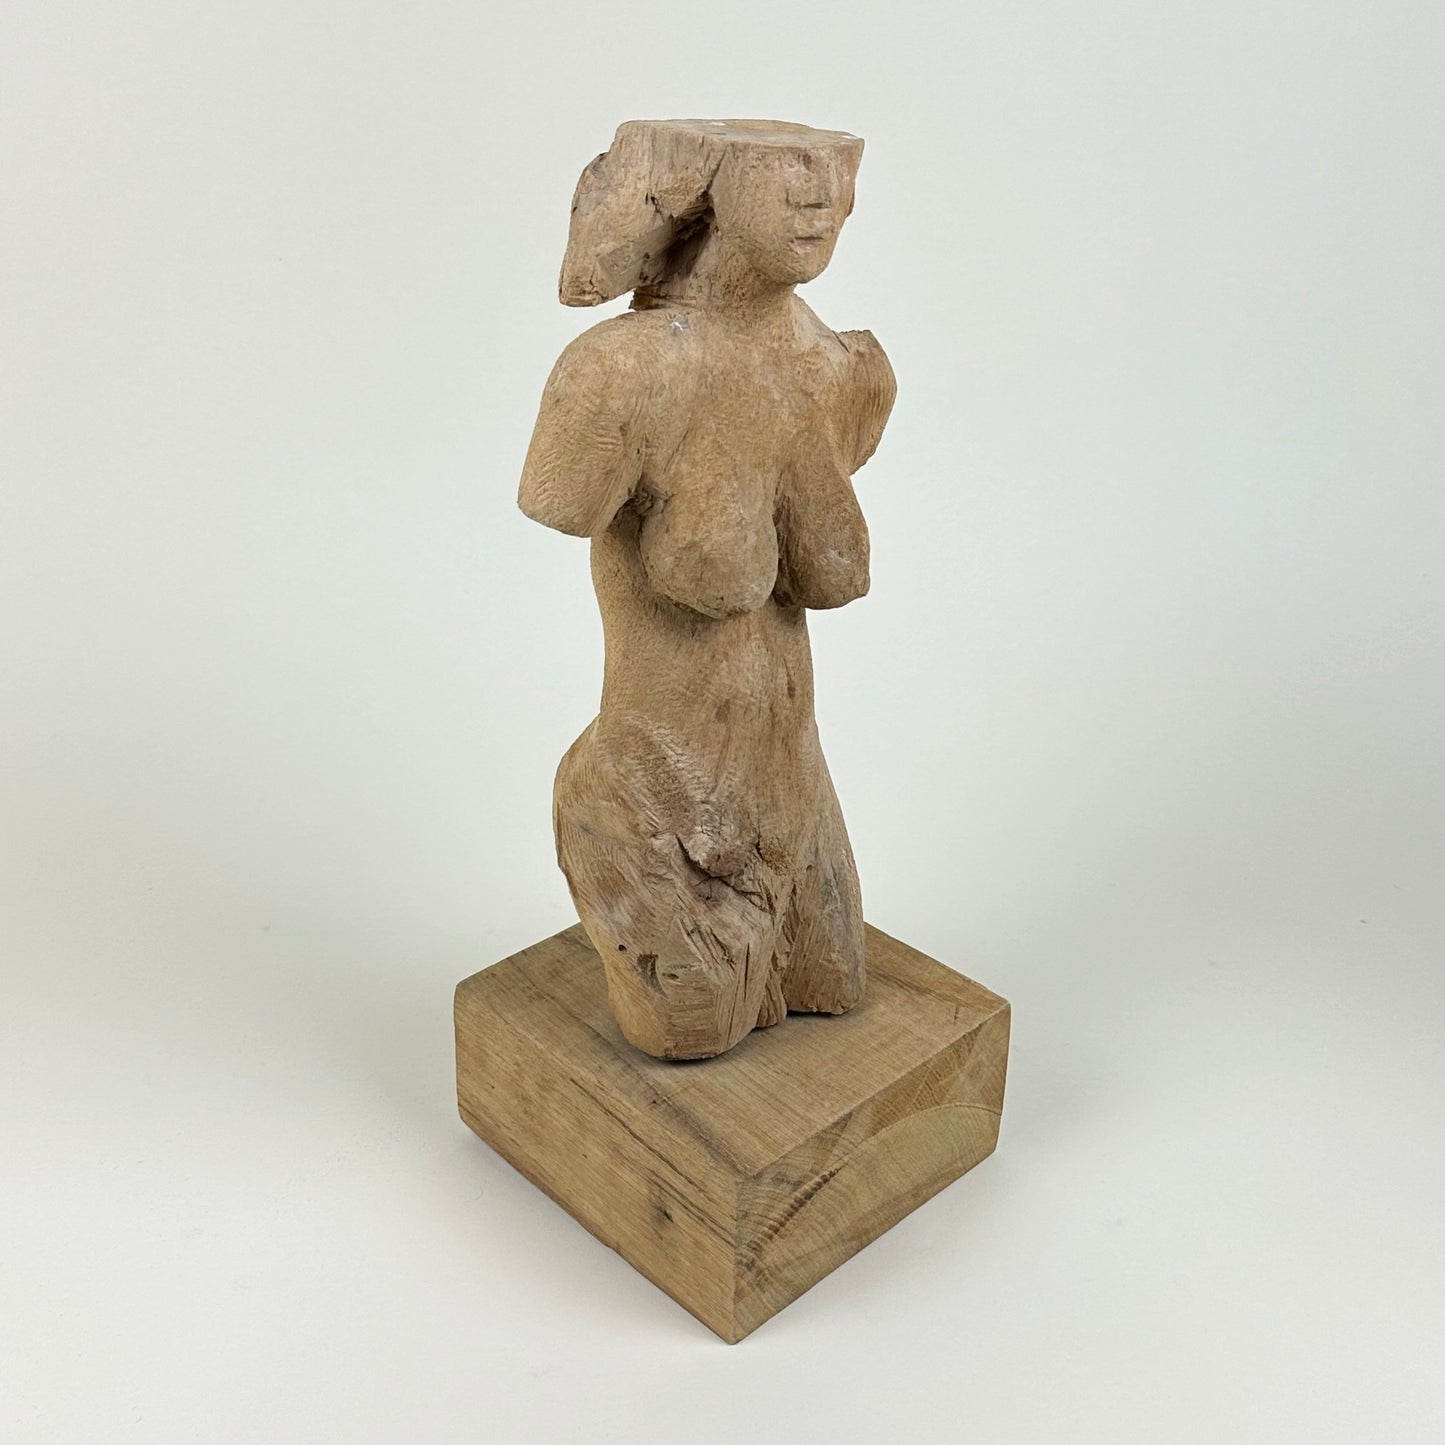 Wooden sculpture/bust of a woman, vintage